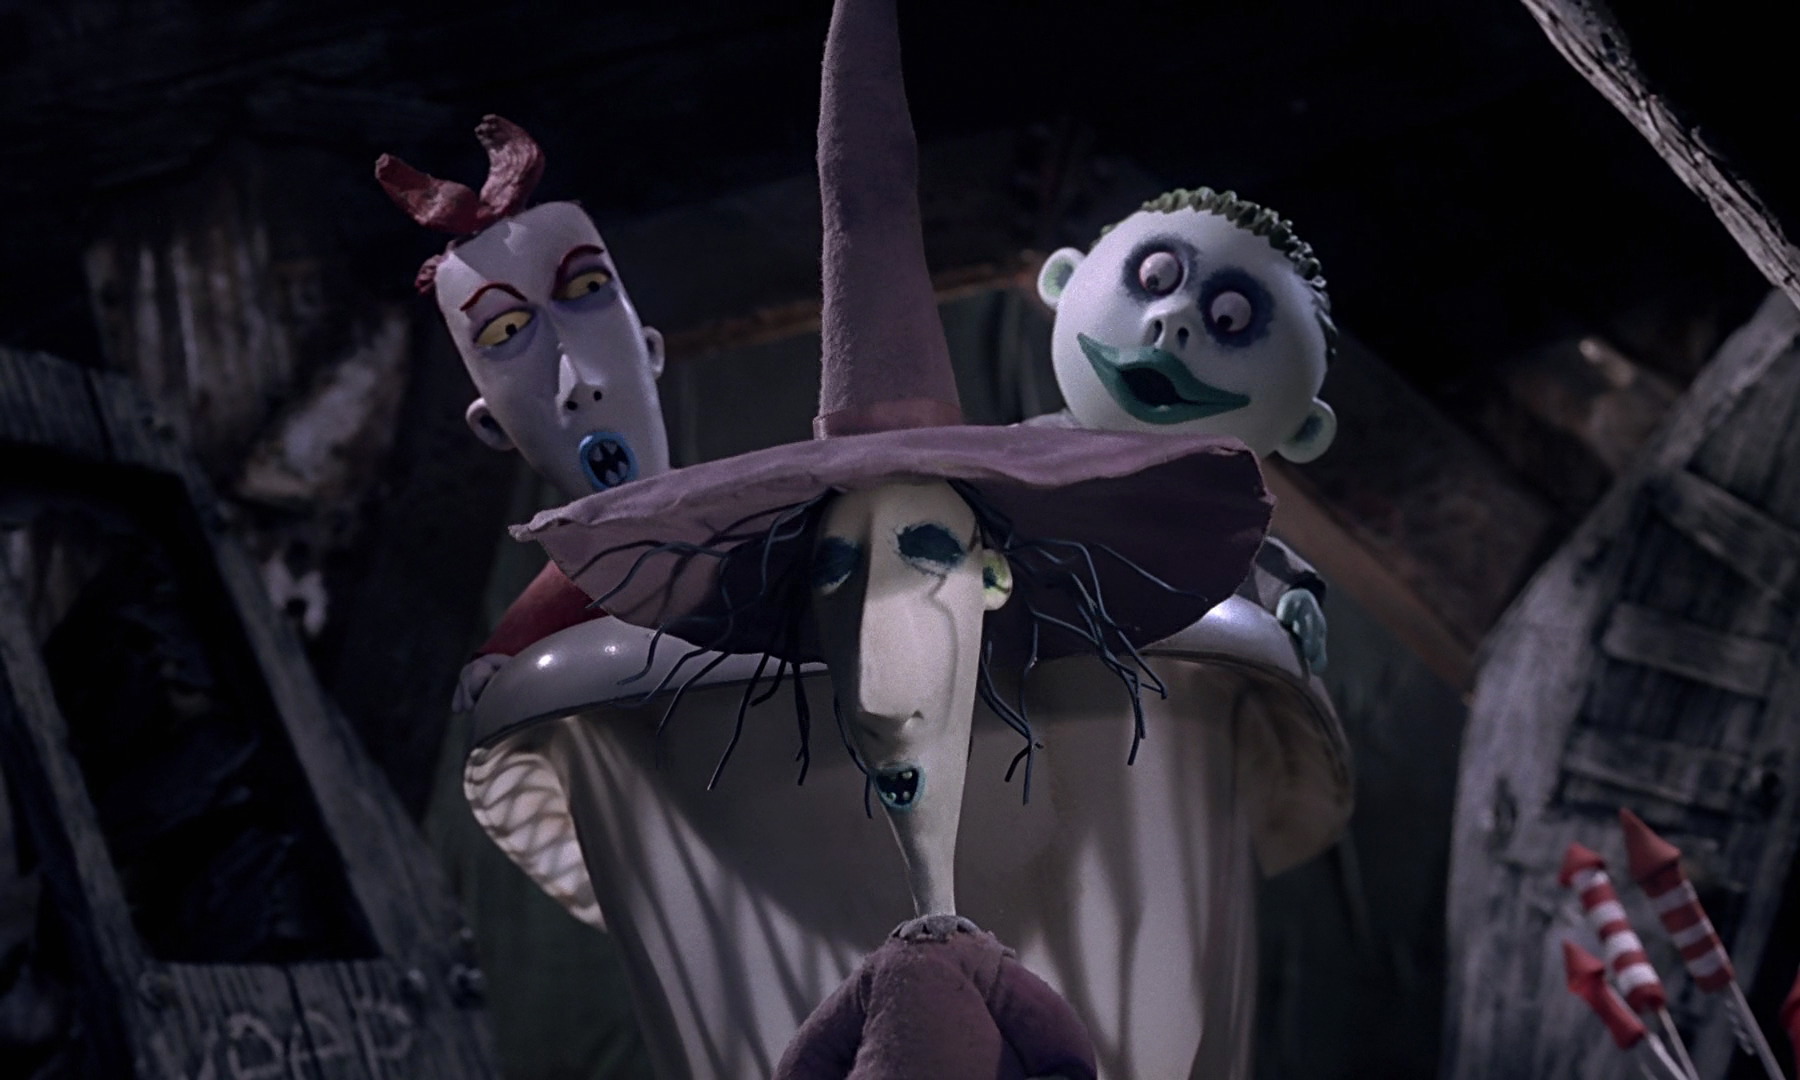 Little Witch, The Nightmare Before Christmas Wiki